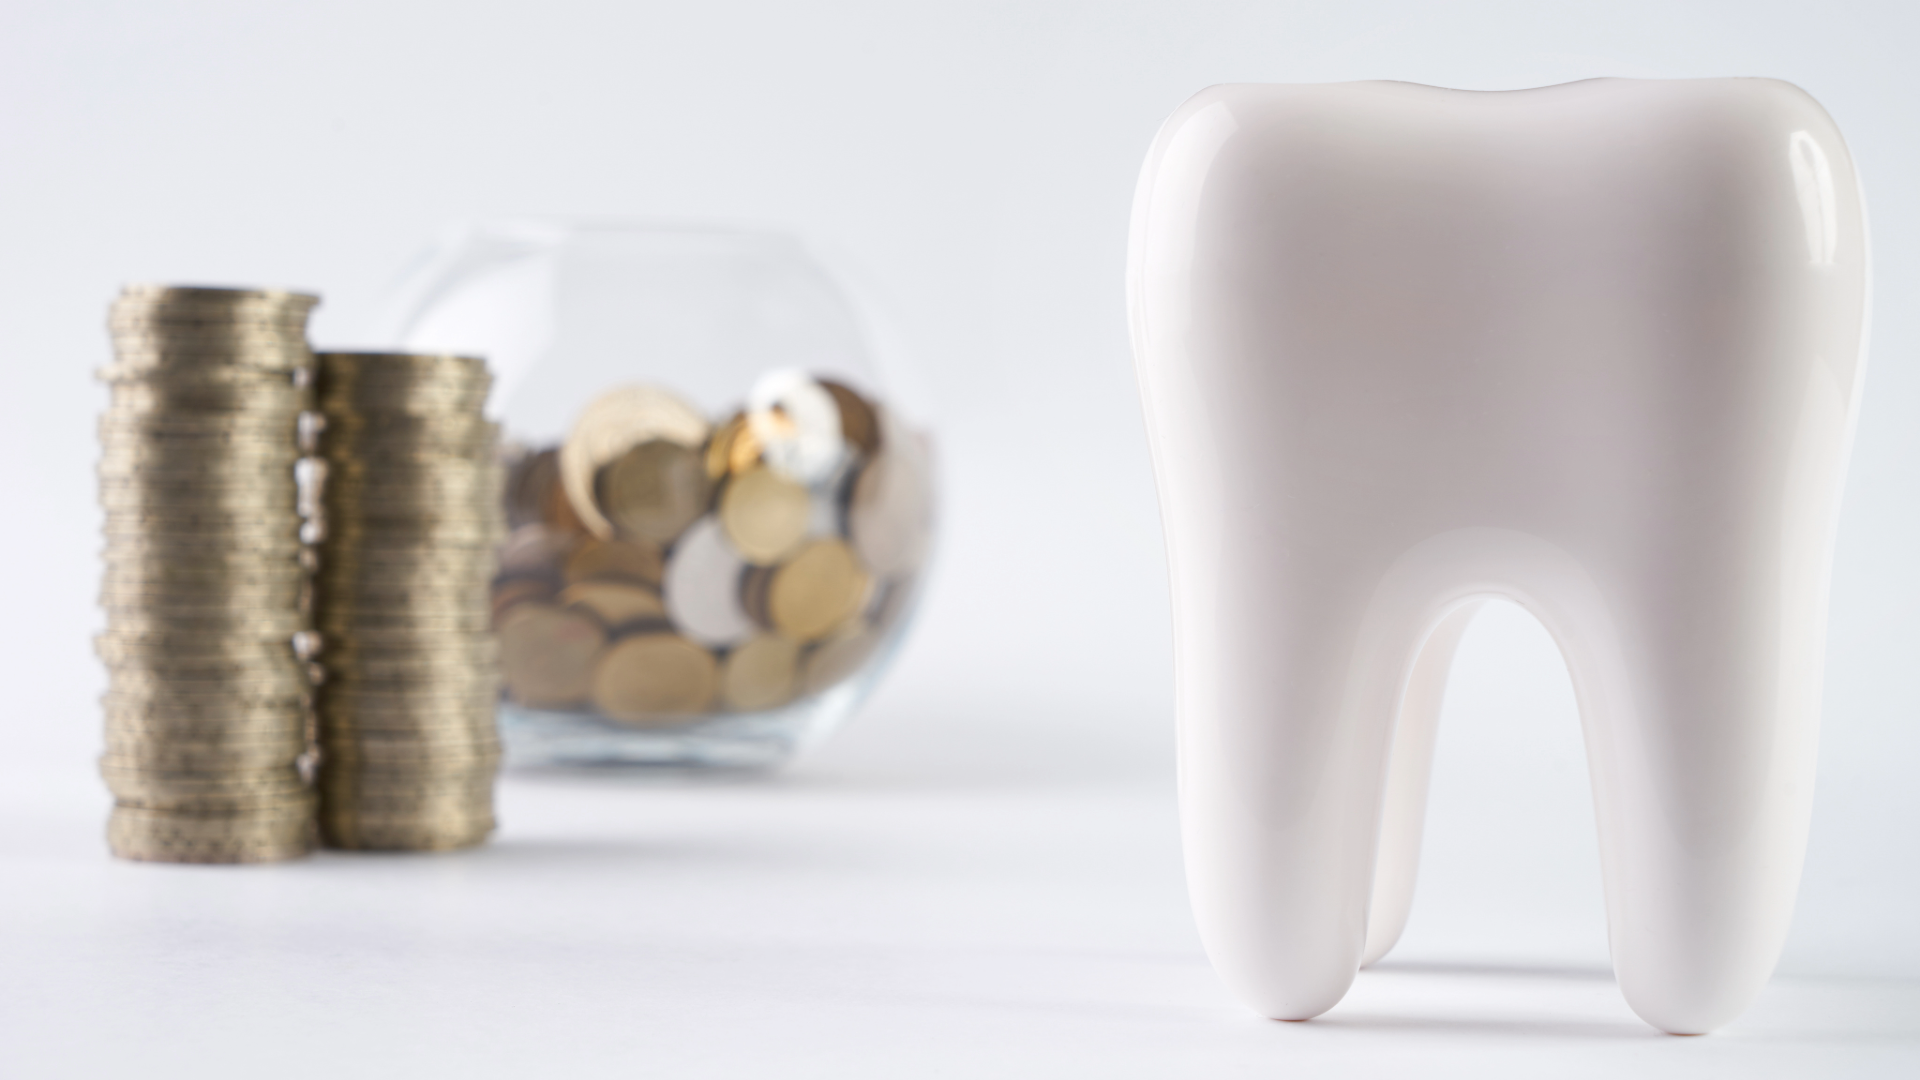 Questions Arise In the Wake of the American Dental Association Investment In a Pair of Dental Startups